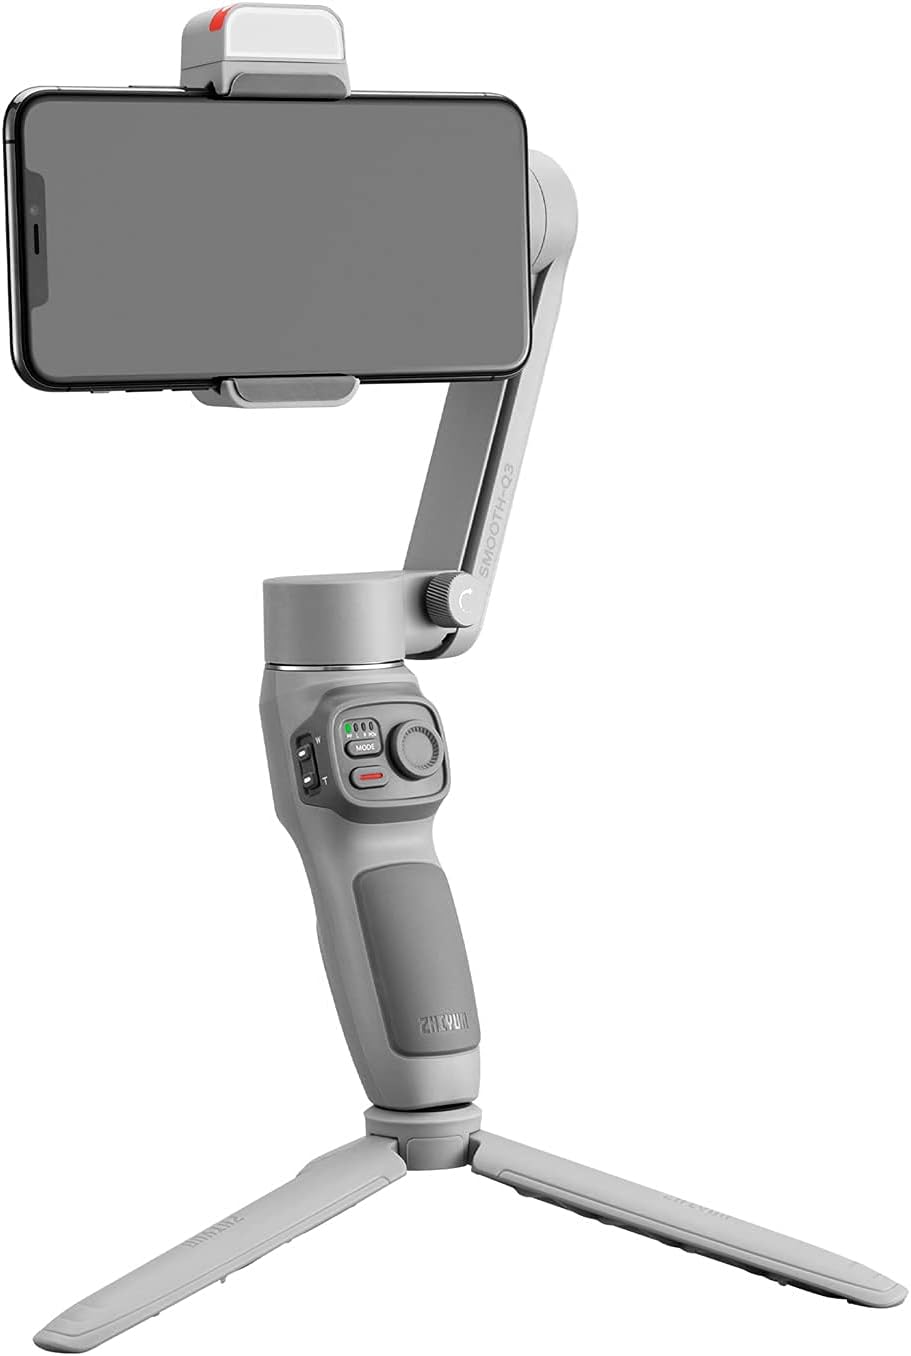 Zhiyun Smooth-Q3 Smartphone 3-Axis Gimbal Stabilizer - Features a built-in rotatable LED video light. 6970194086521